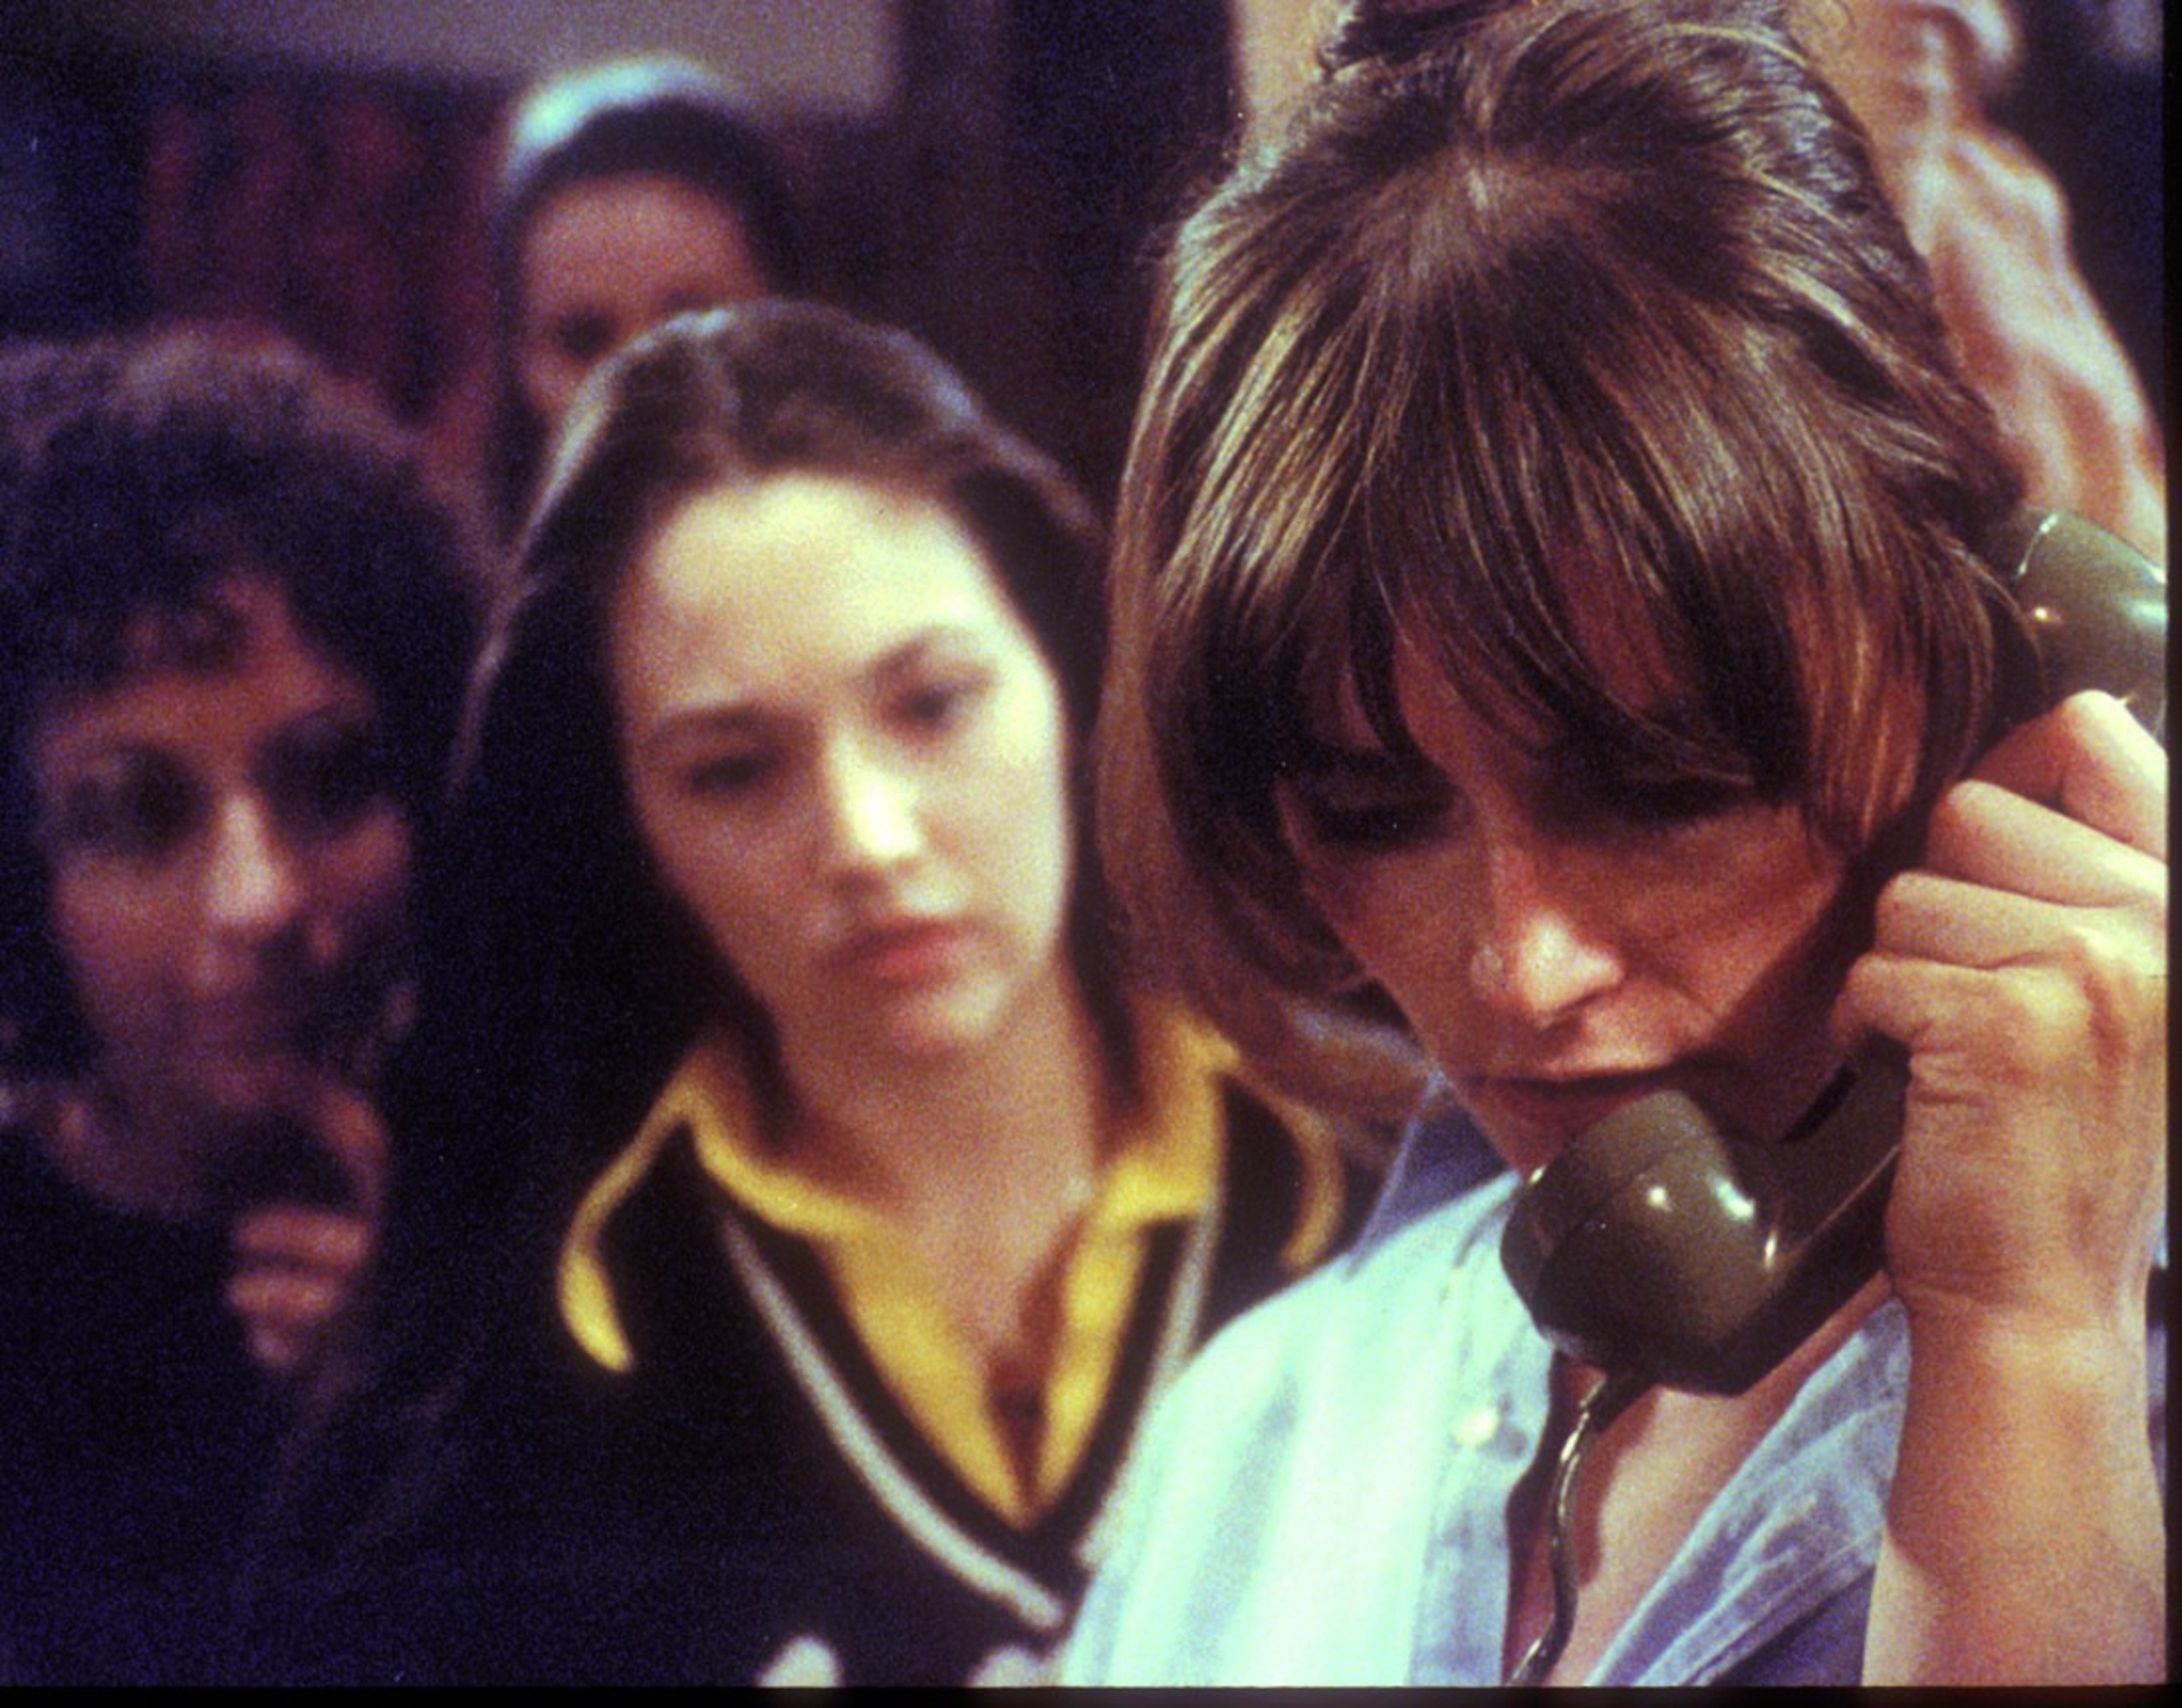 <p>In addition to being a holiday horror film, <em>Black Christmas</em> is also a sorority movie, as it centers on an obscene caller who breaks into a sorority house to terrorize the sisters inside. Although it received mixed reviews from critics and audiences upon its release, <em>Black Christmas</em> has since become a cult classic for horror fans as a darkly enjoyable holiday slasher featuring a few familiar faces, including Olivia Hussey, Margot Kidder, Andrea Martin, and John Saxon.</p><p>You may also like: <a href='https://www.yardbarker.com/entertainment/articles/20_facts_you_may_not_know_about_the_mummy/s1__37678787'>20 facts you may not know about 'The Mummy'</a></p>